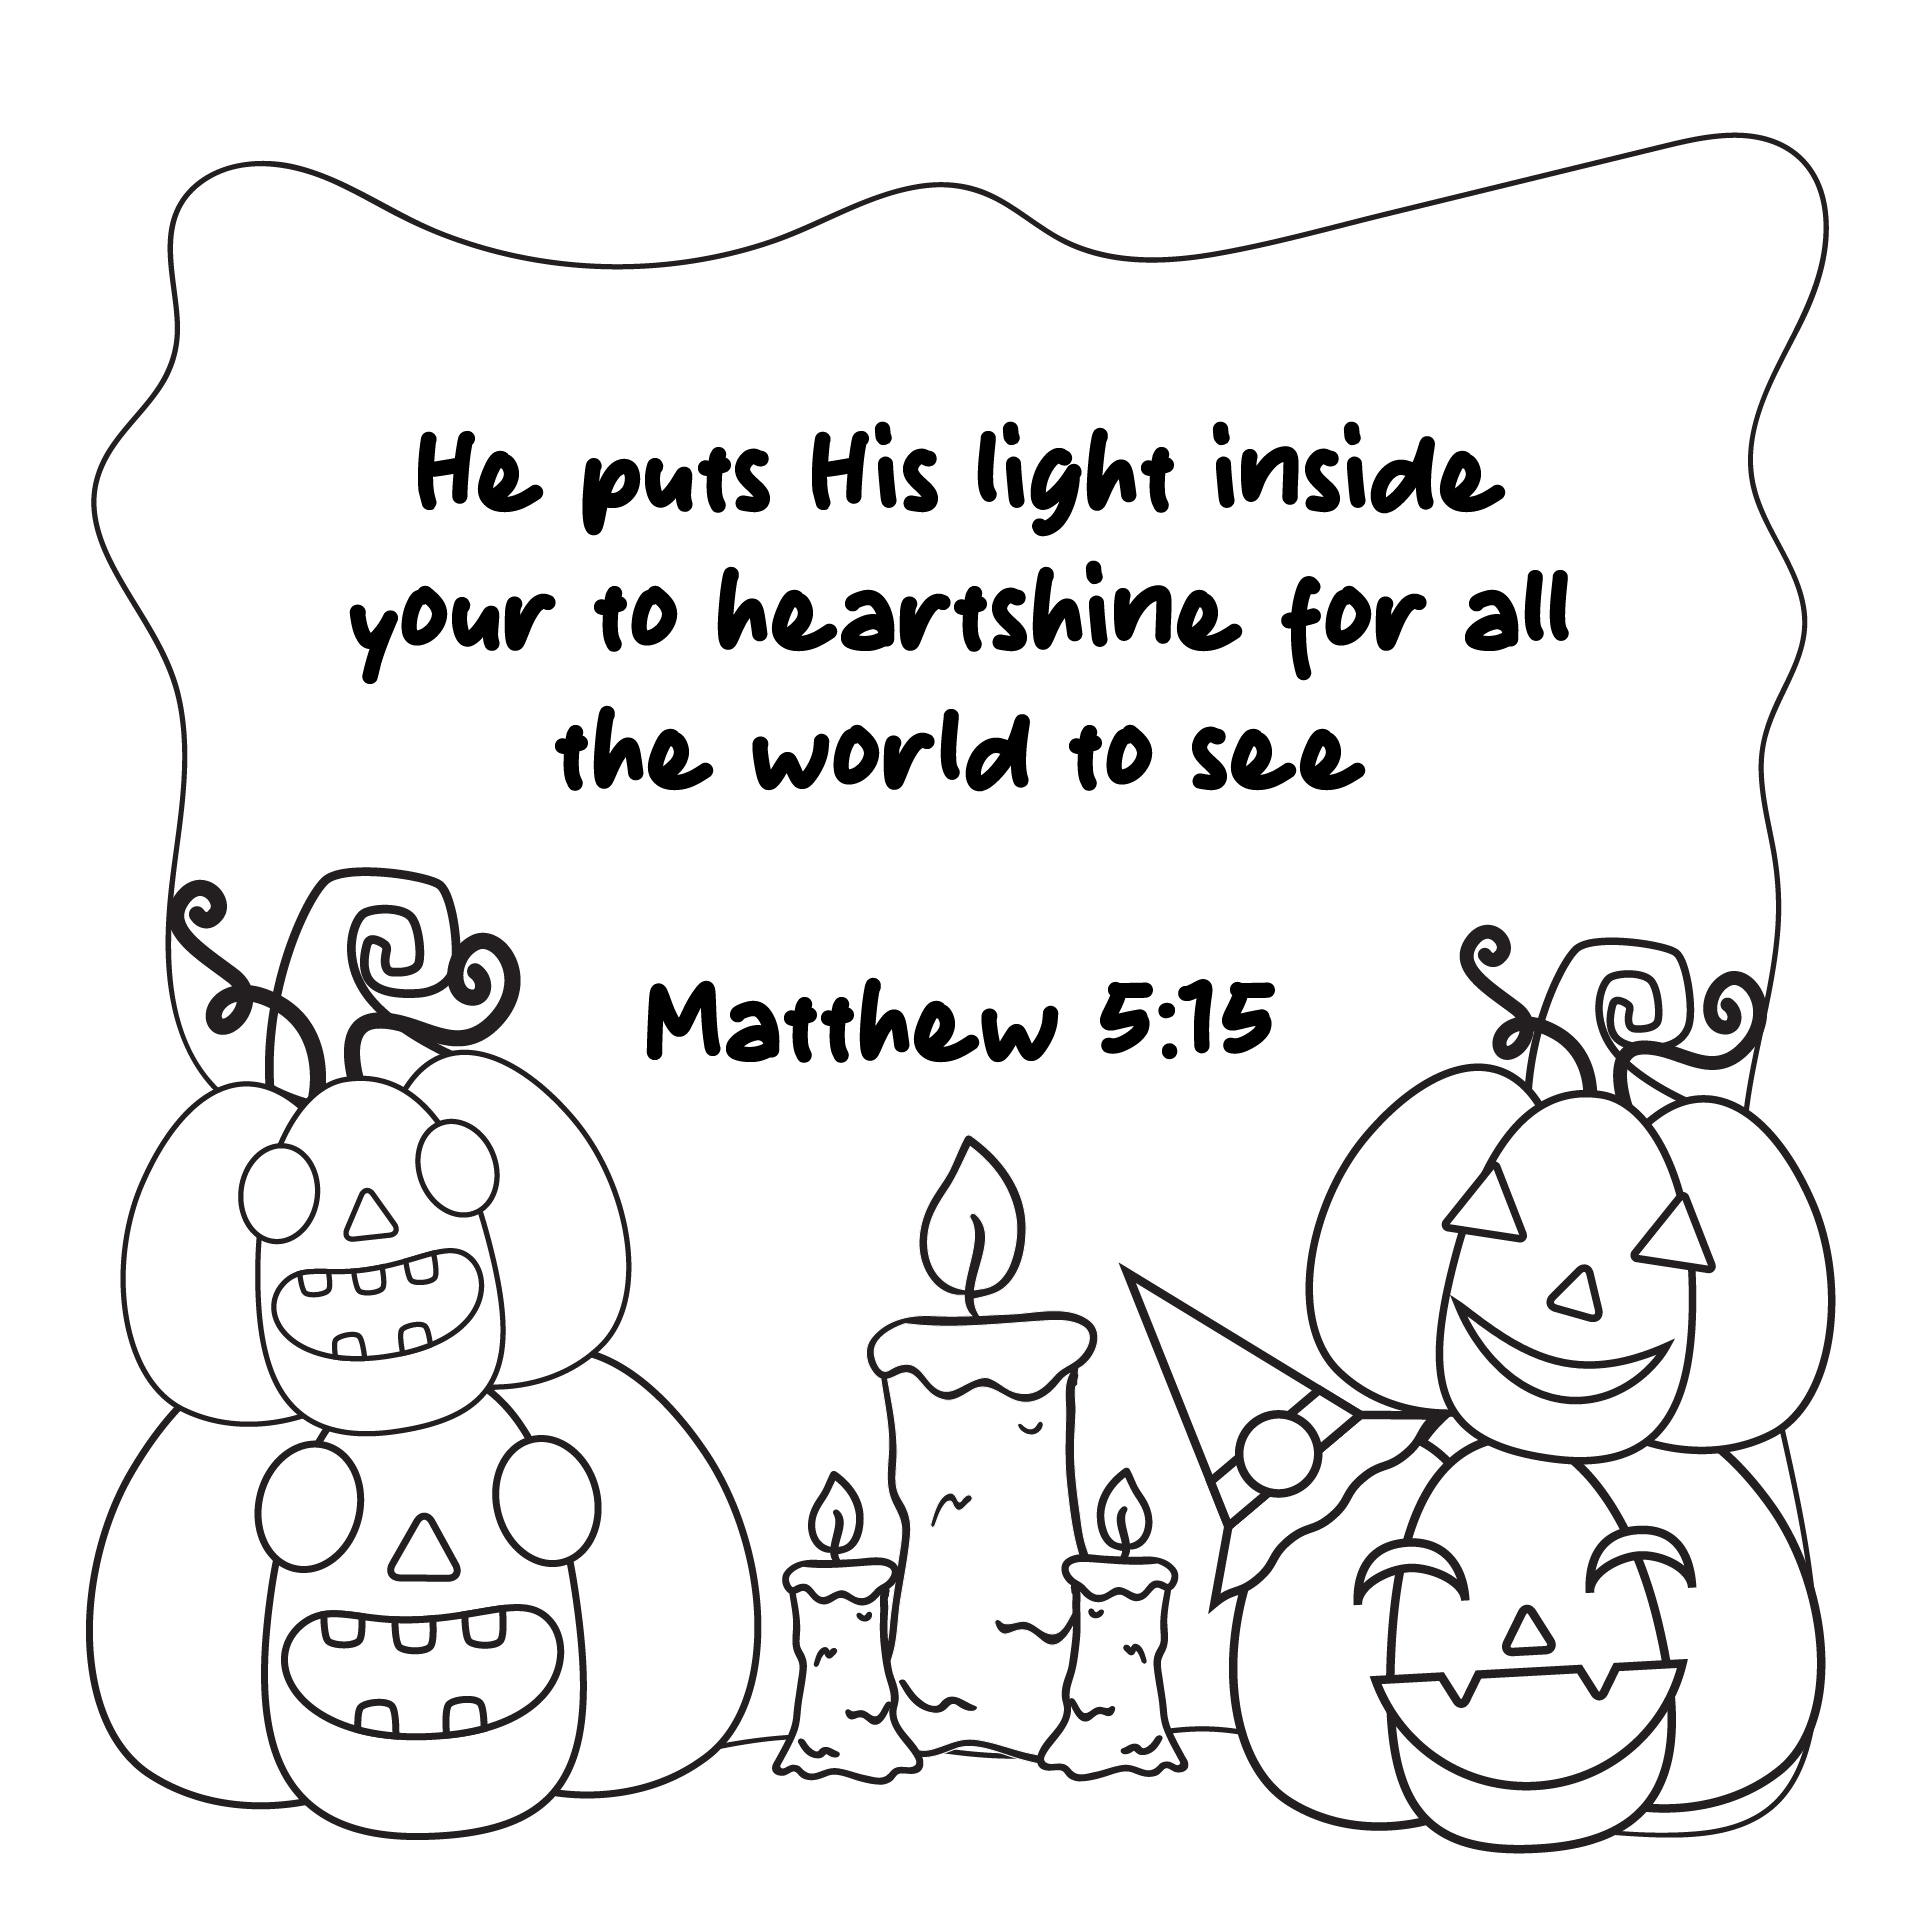 Pumpkin Carving Coloring Pages With Bible Verses For Halloween Printable